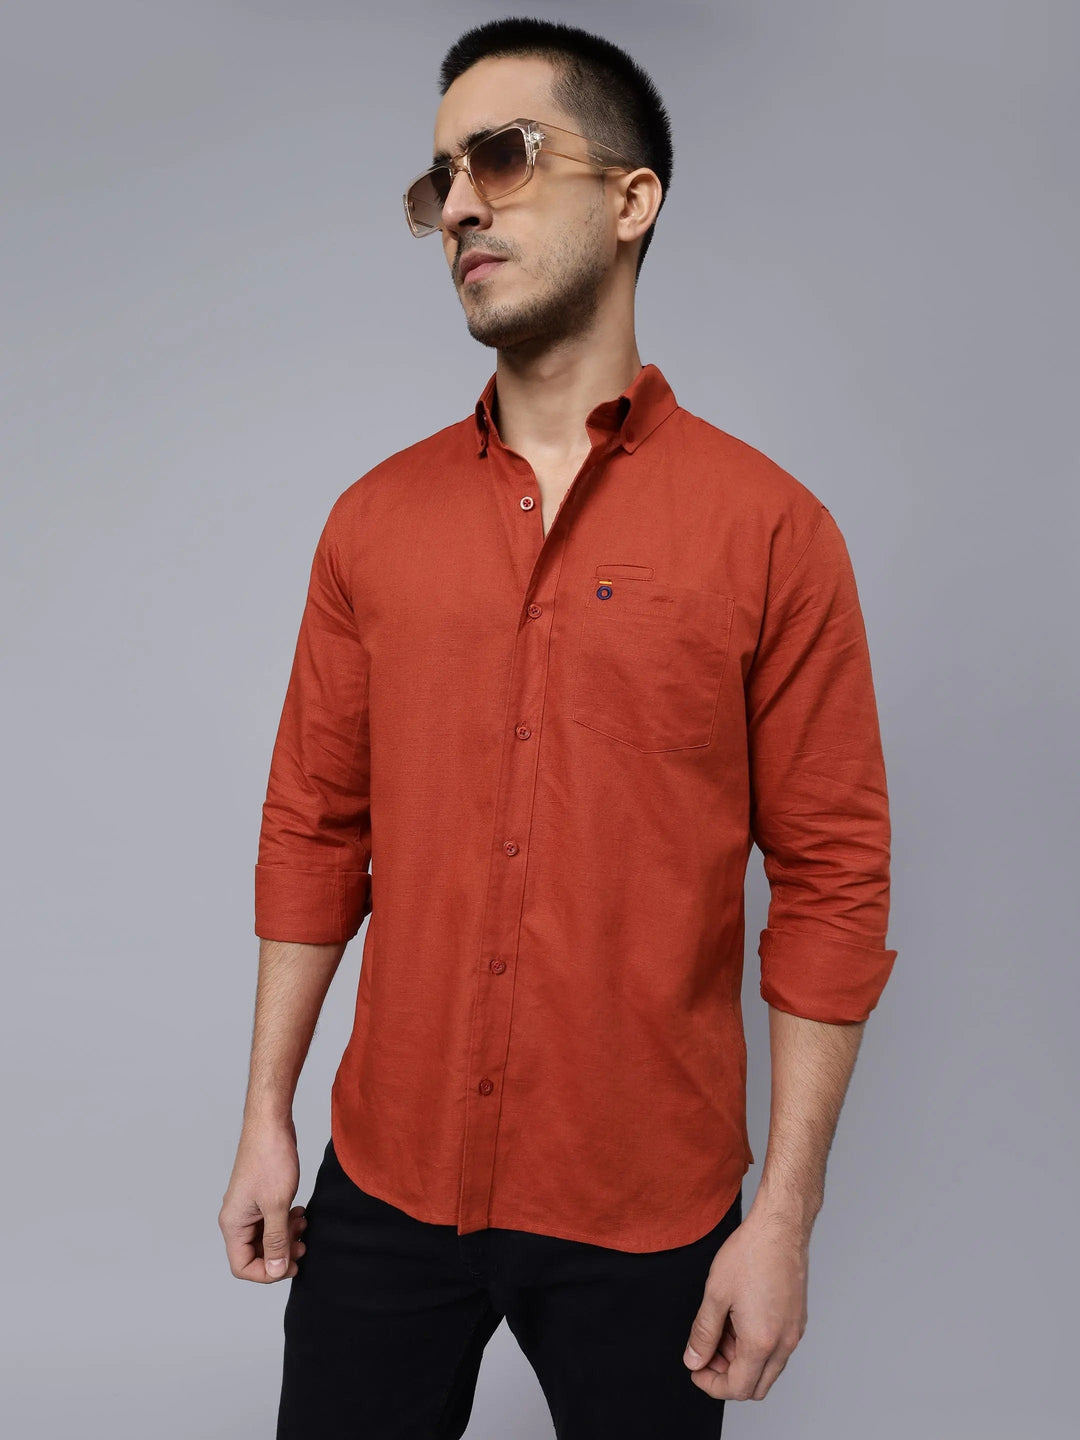 Regular Fit Cotton Solid Rust Casual Shirt For Men - Peplos Jeans 